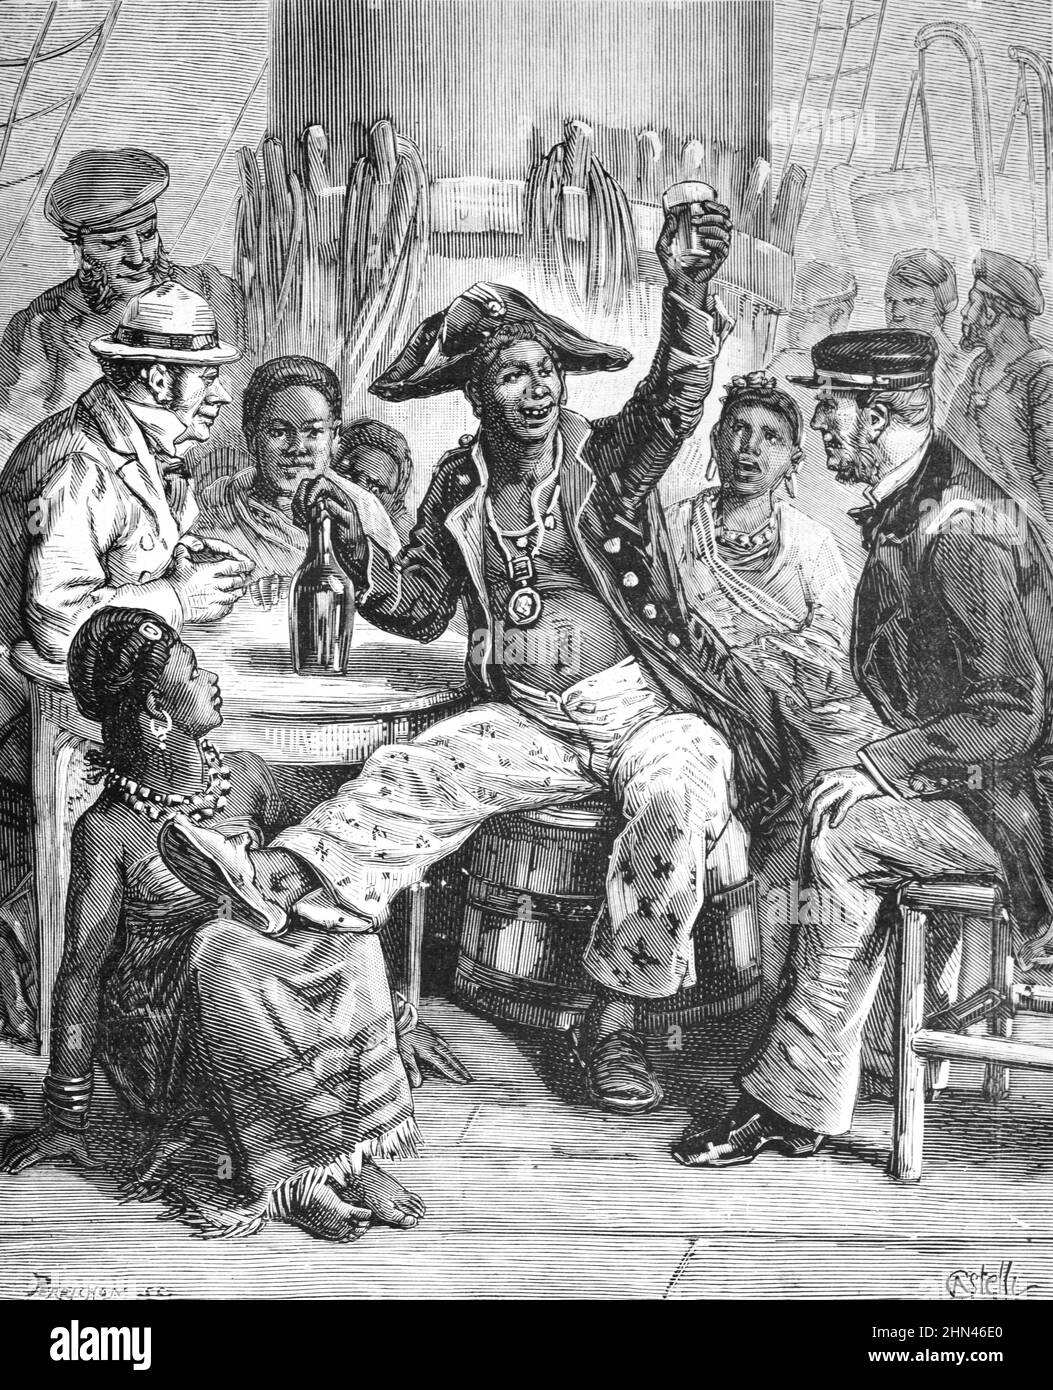 Sakalava Malagasy Chief on Board the French Ship Fortuné off Coast of Madagascar. Vintage Illustration or Engraving 1881 (Castelli) Stock Photo